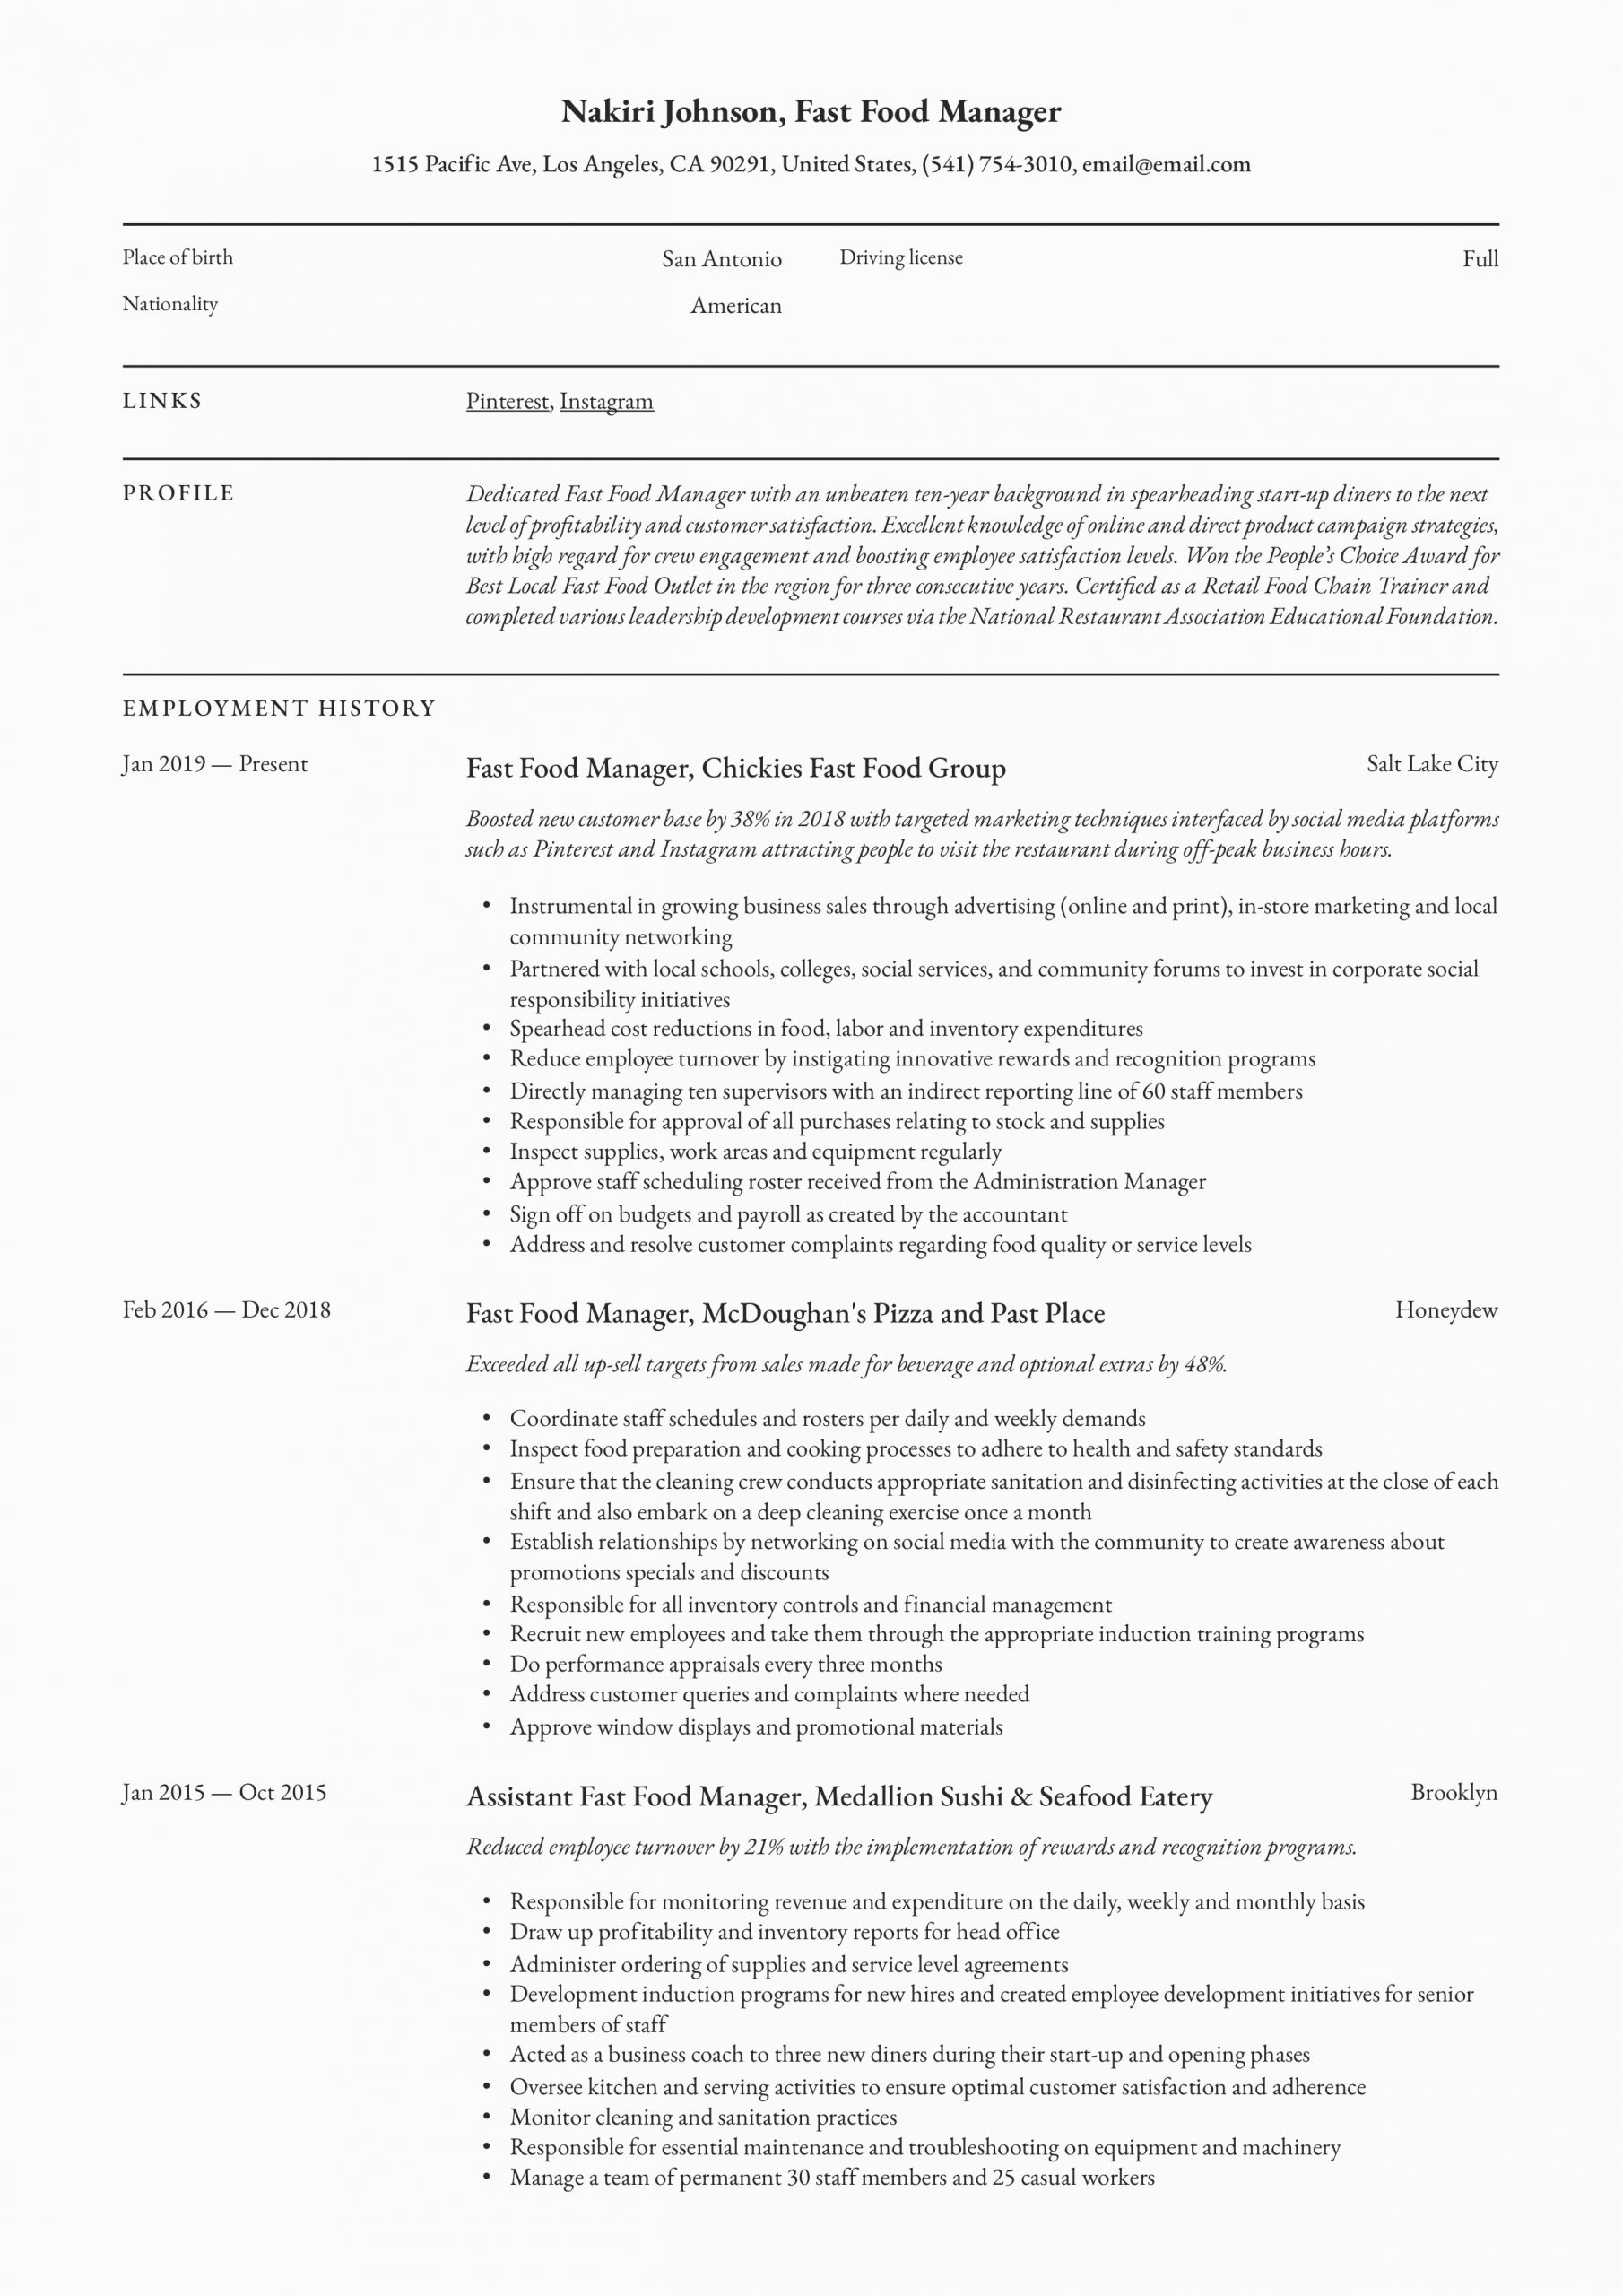 Sample Resumes for Fast Food Jobs Resume Examples for Fast Food Jobs Best Resume Examples